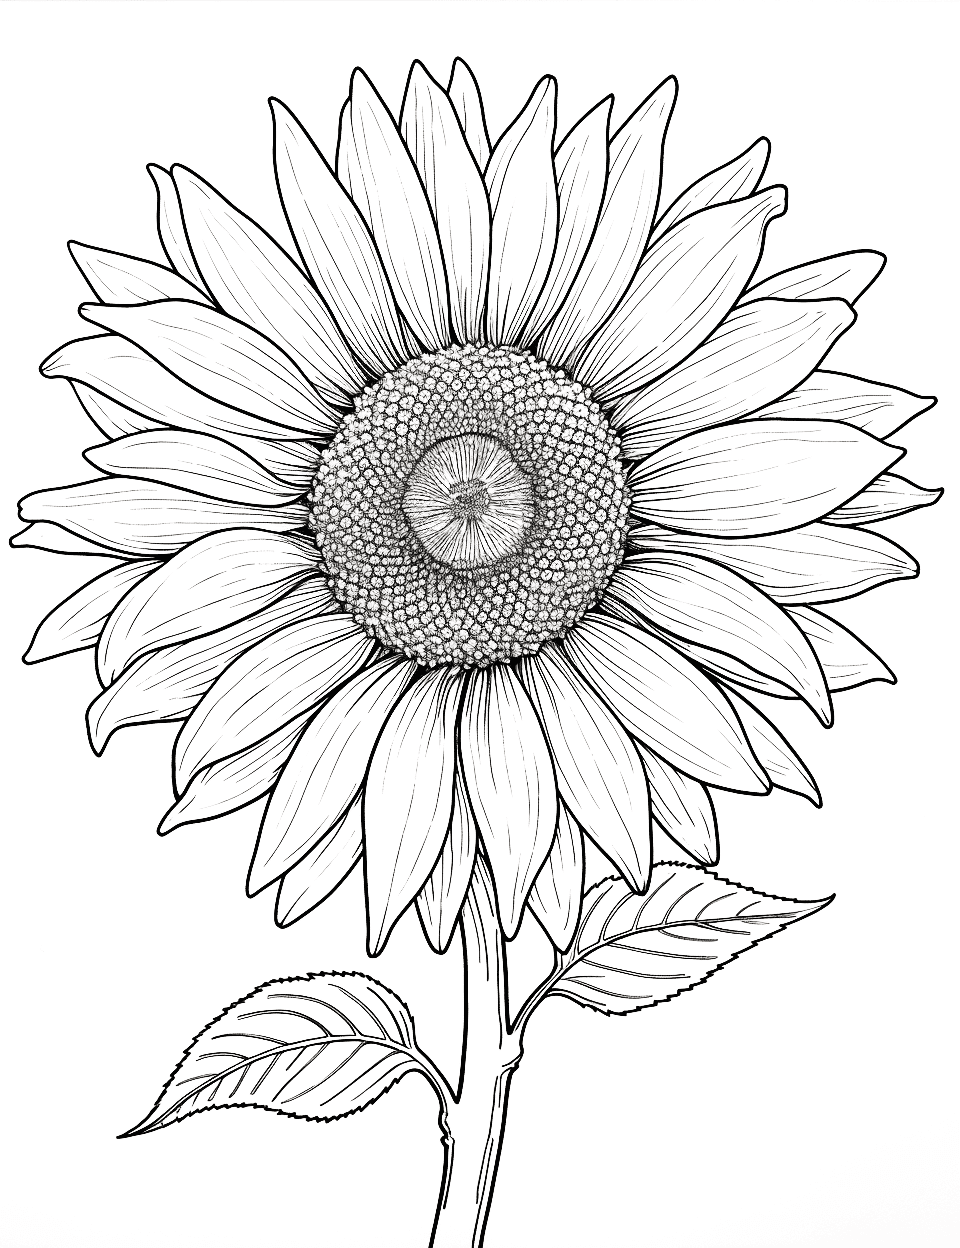 Sunflower's Sunny Day Adult Coloring Page - A blooming sunflower with petals reaching out.